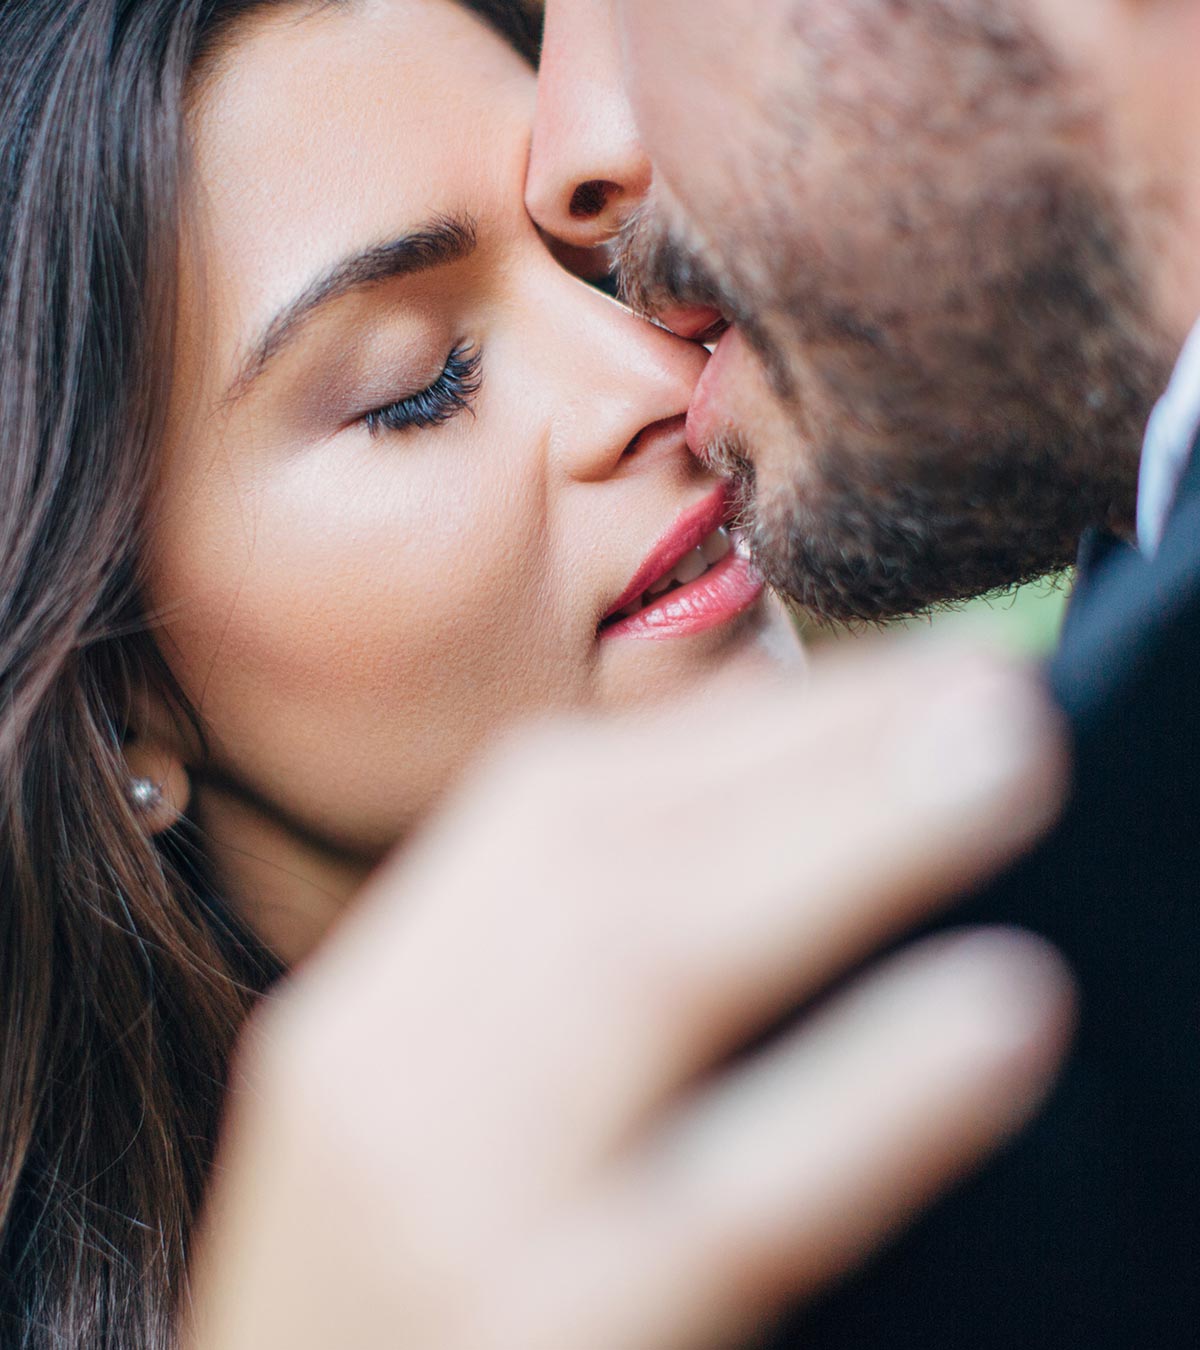 How To Spice Up Your Relationship: 23 Ideas That Will Work